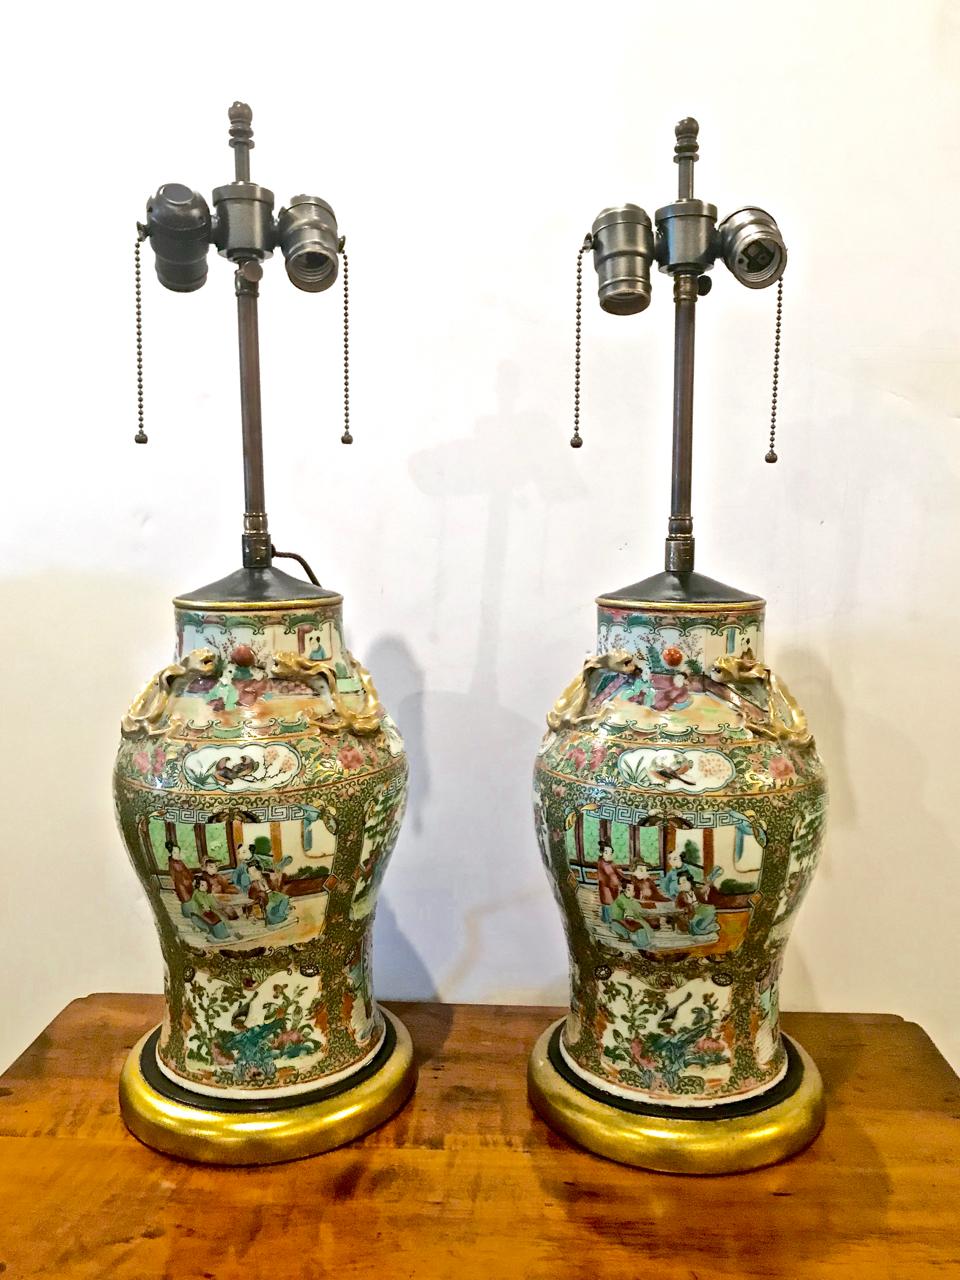 This is a good pair of mid-19th century Rose Canton vases that have been fitted as lamps. The vases are finely painted, are in excellent condition and have not been drilled for the electrical fittings. We have elected to use the French wire format.